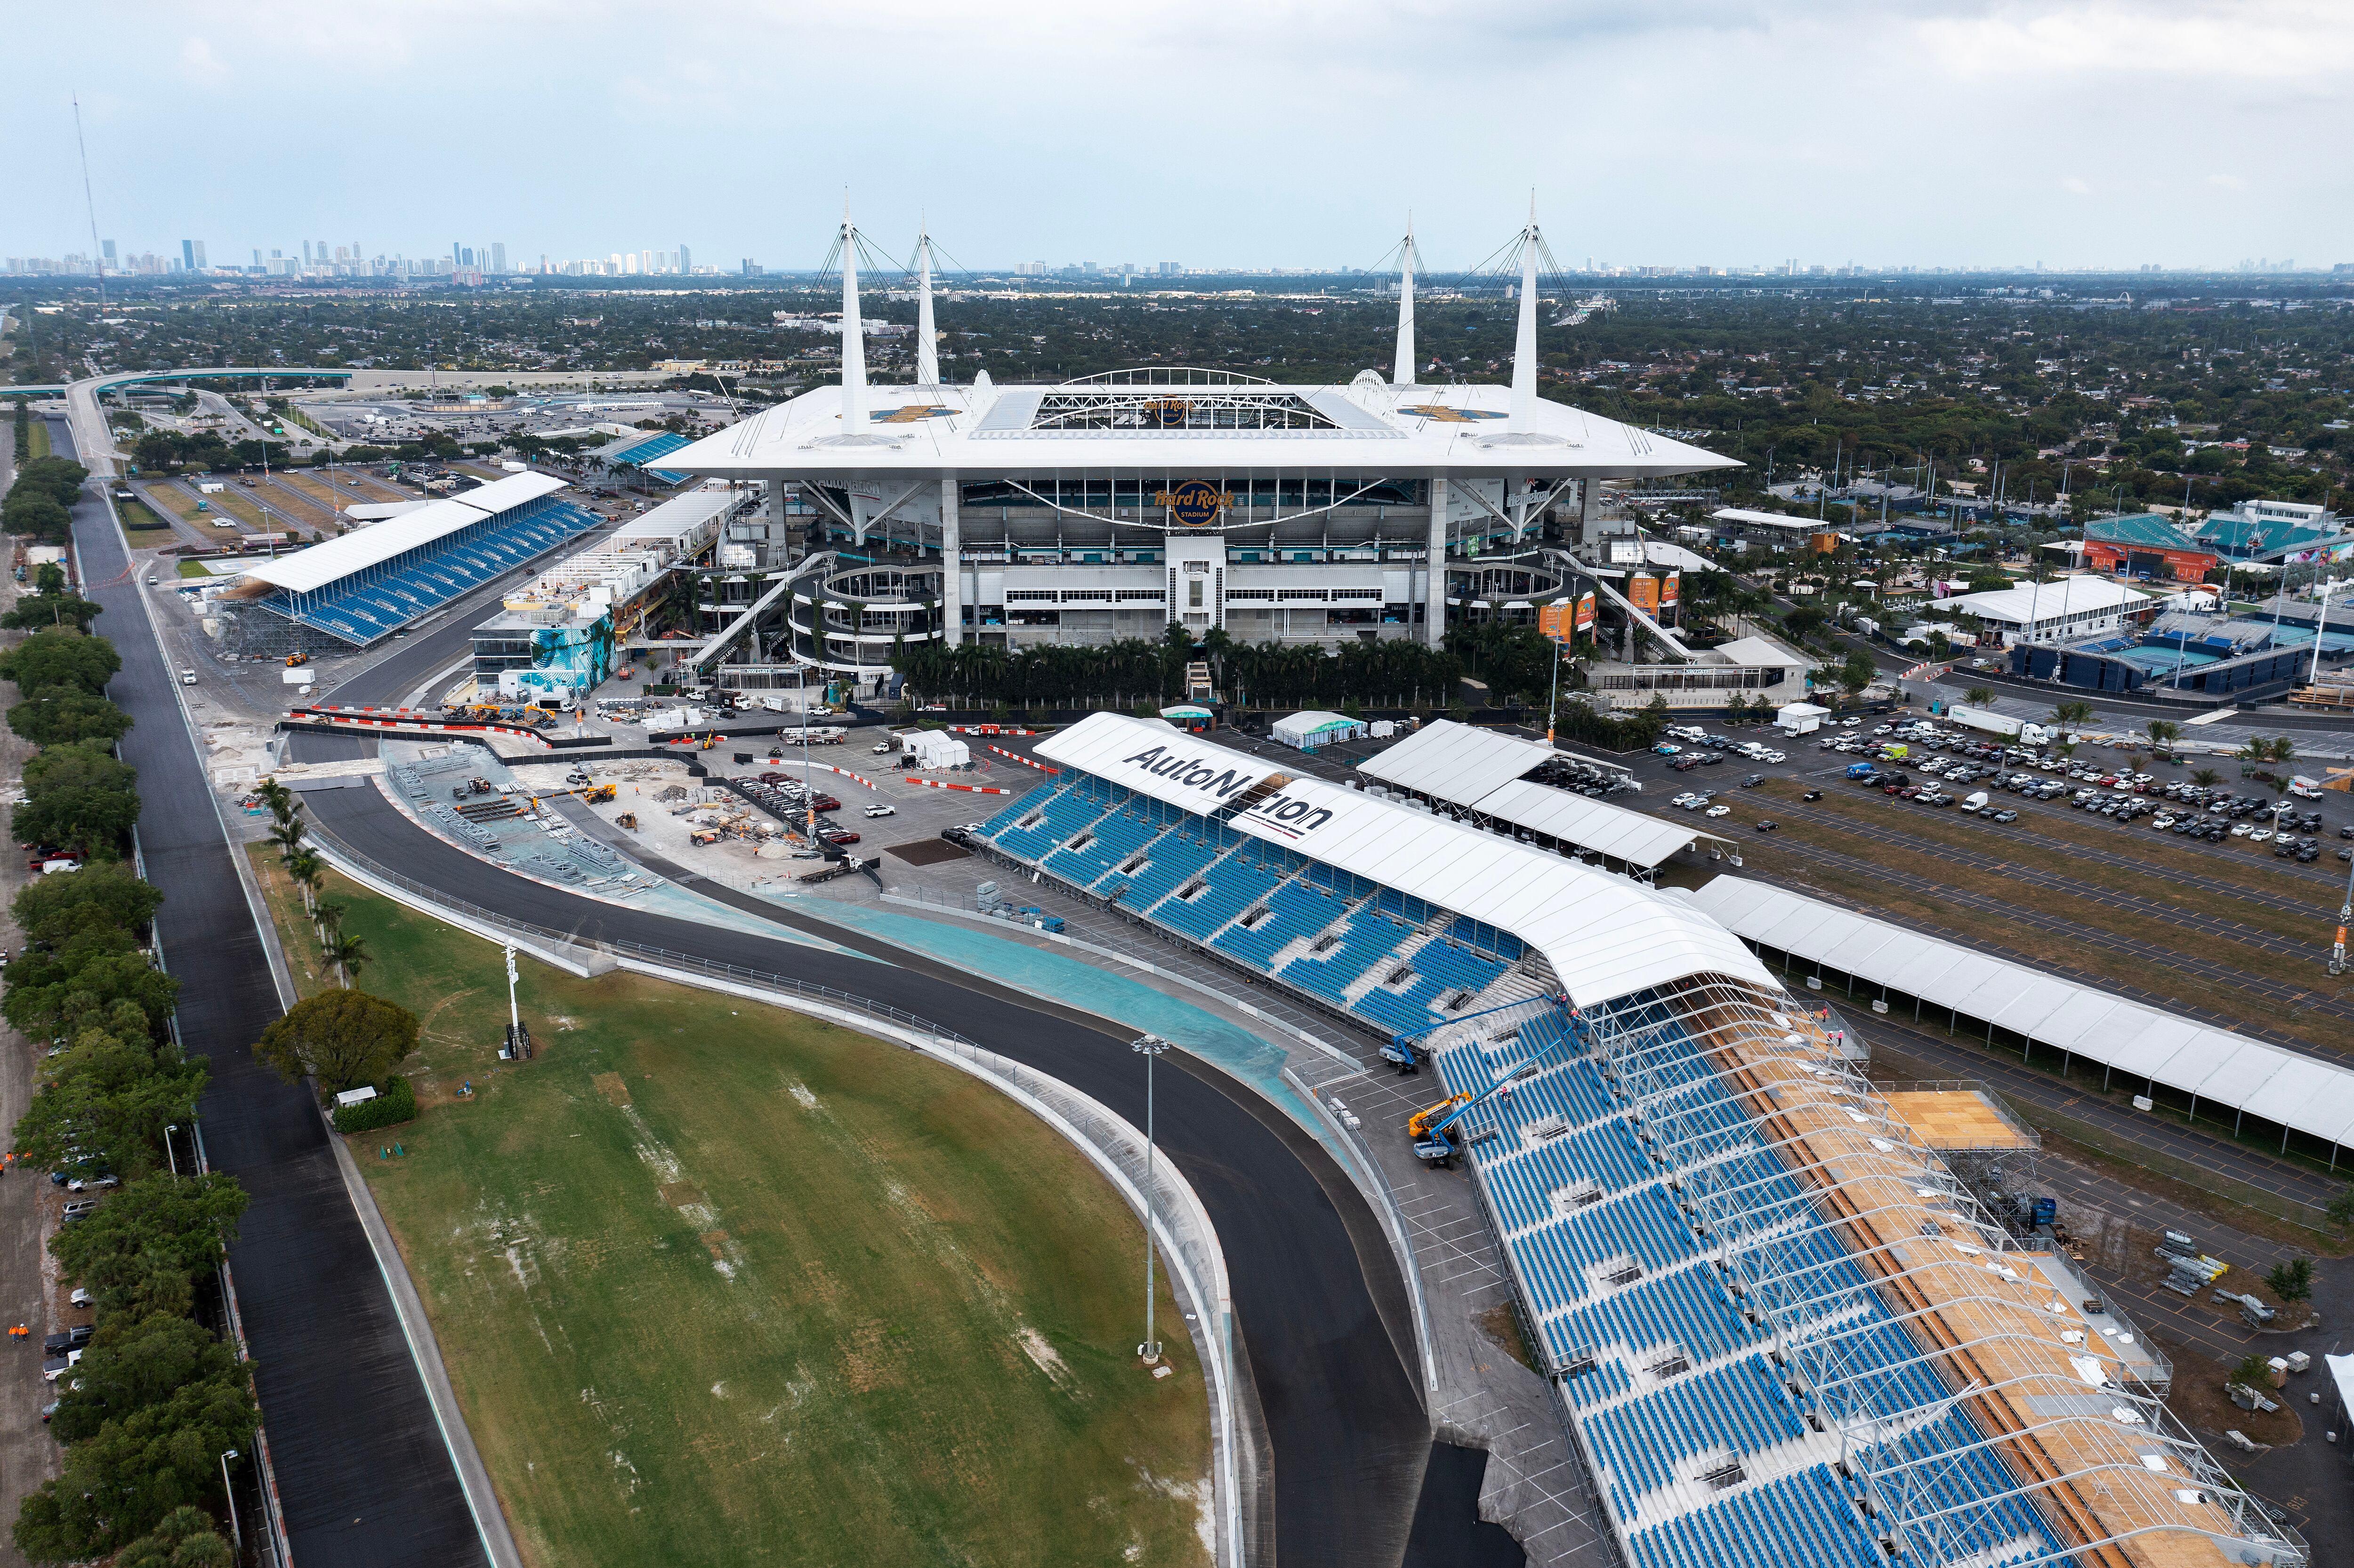 An aerial view of the Hard Rock Stadium.